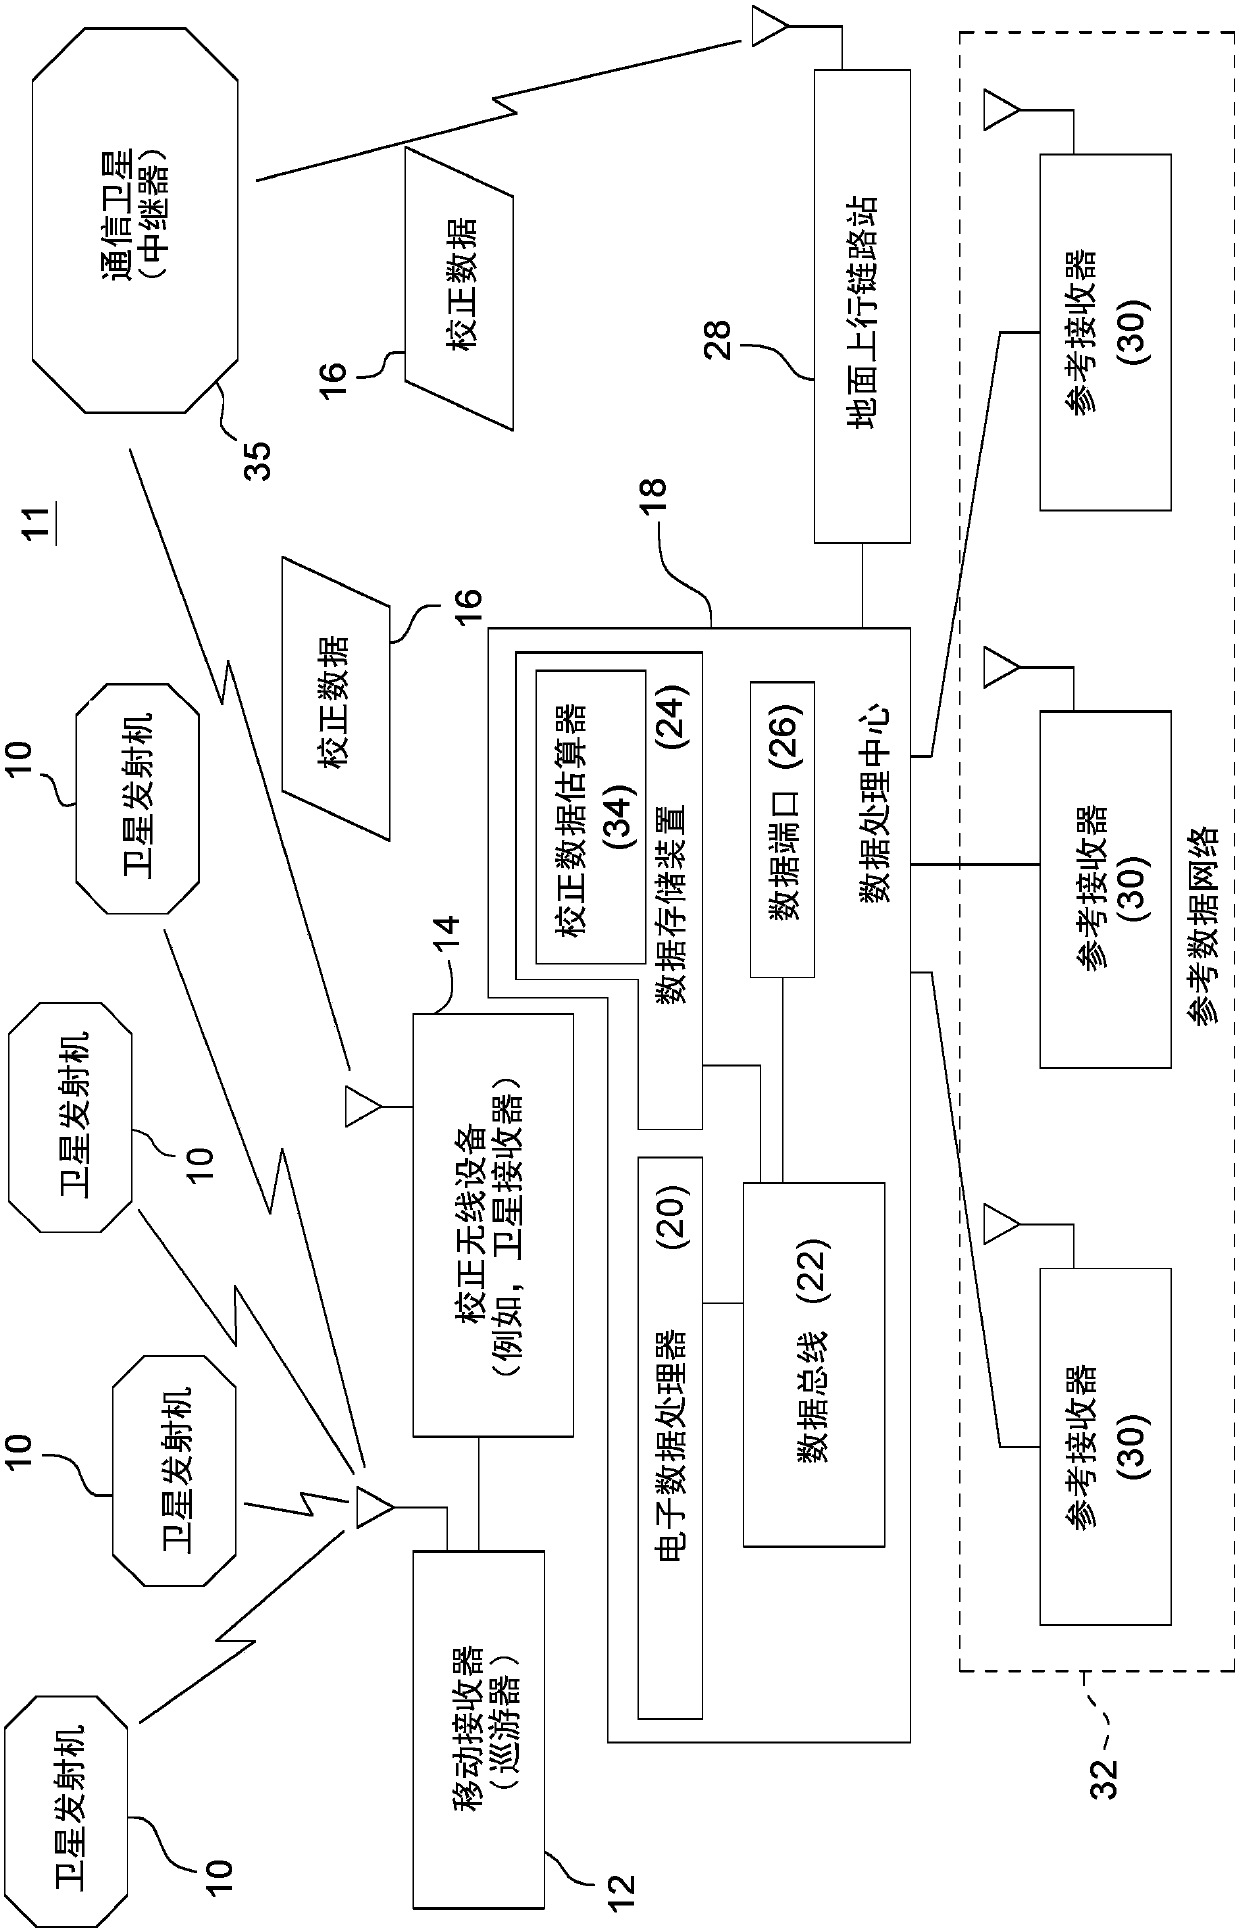 Satellite navigation receiver and method for switching between real-time kinematic mode and relative positioning mode